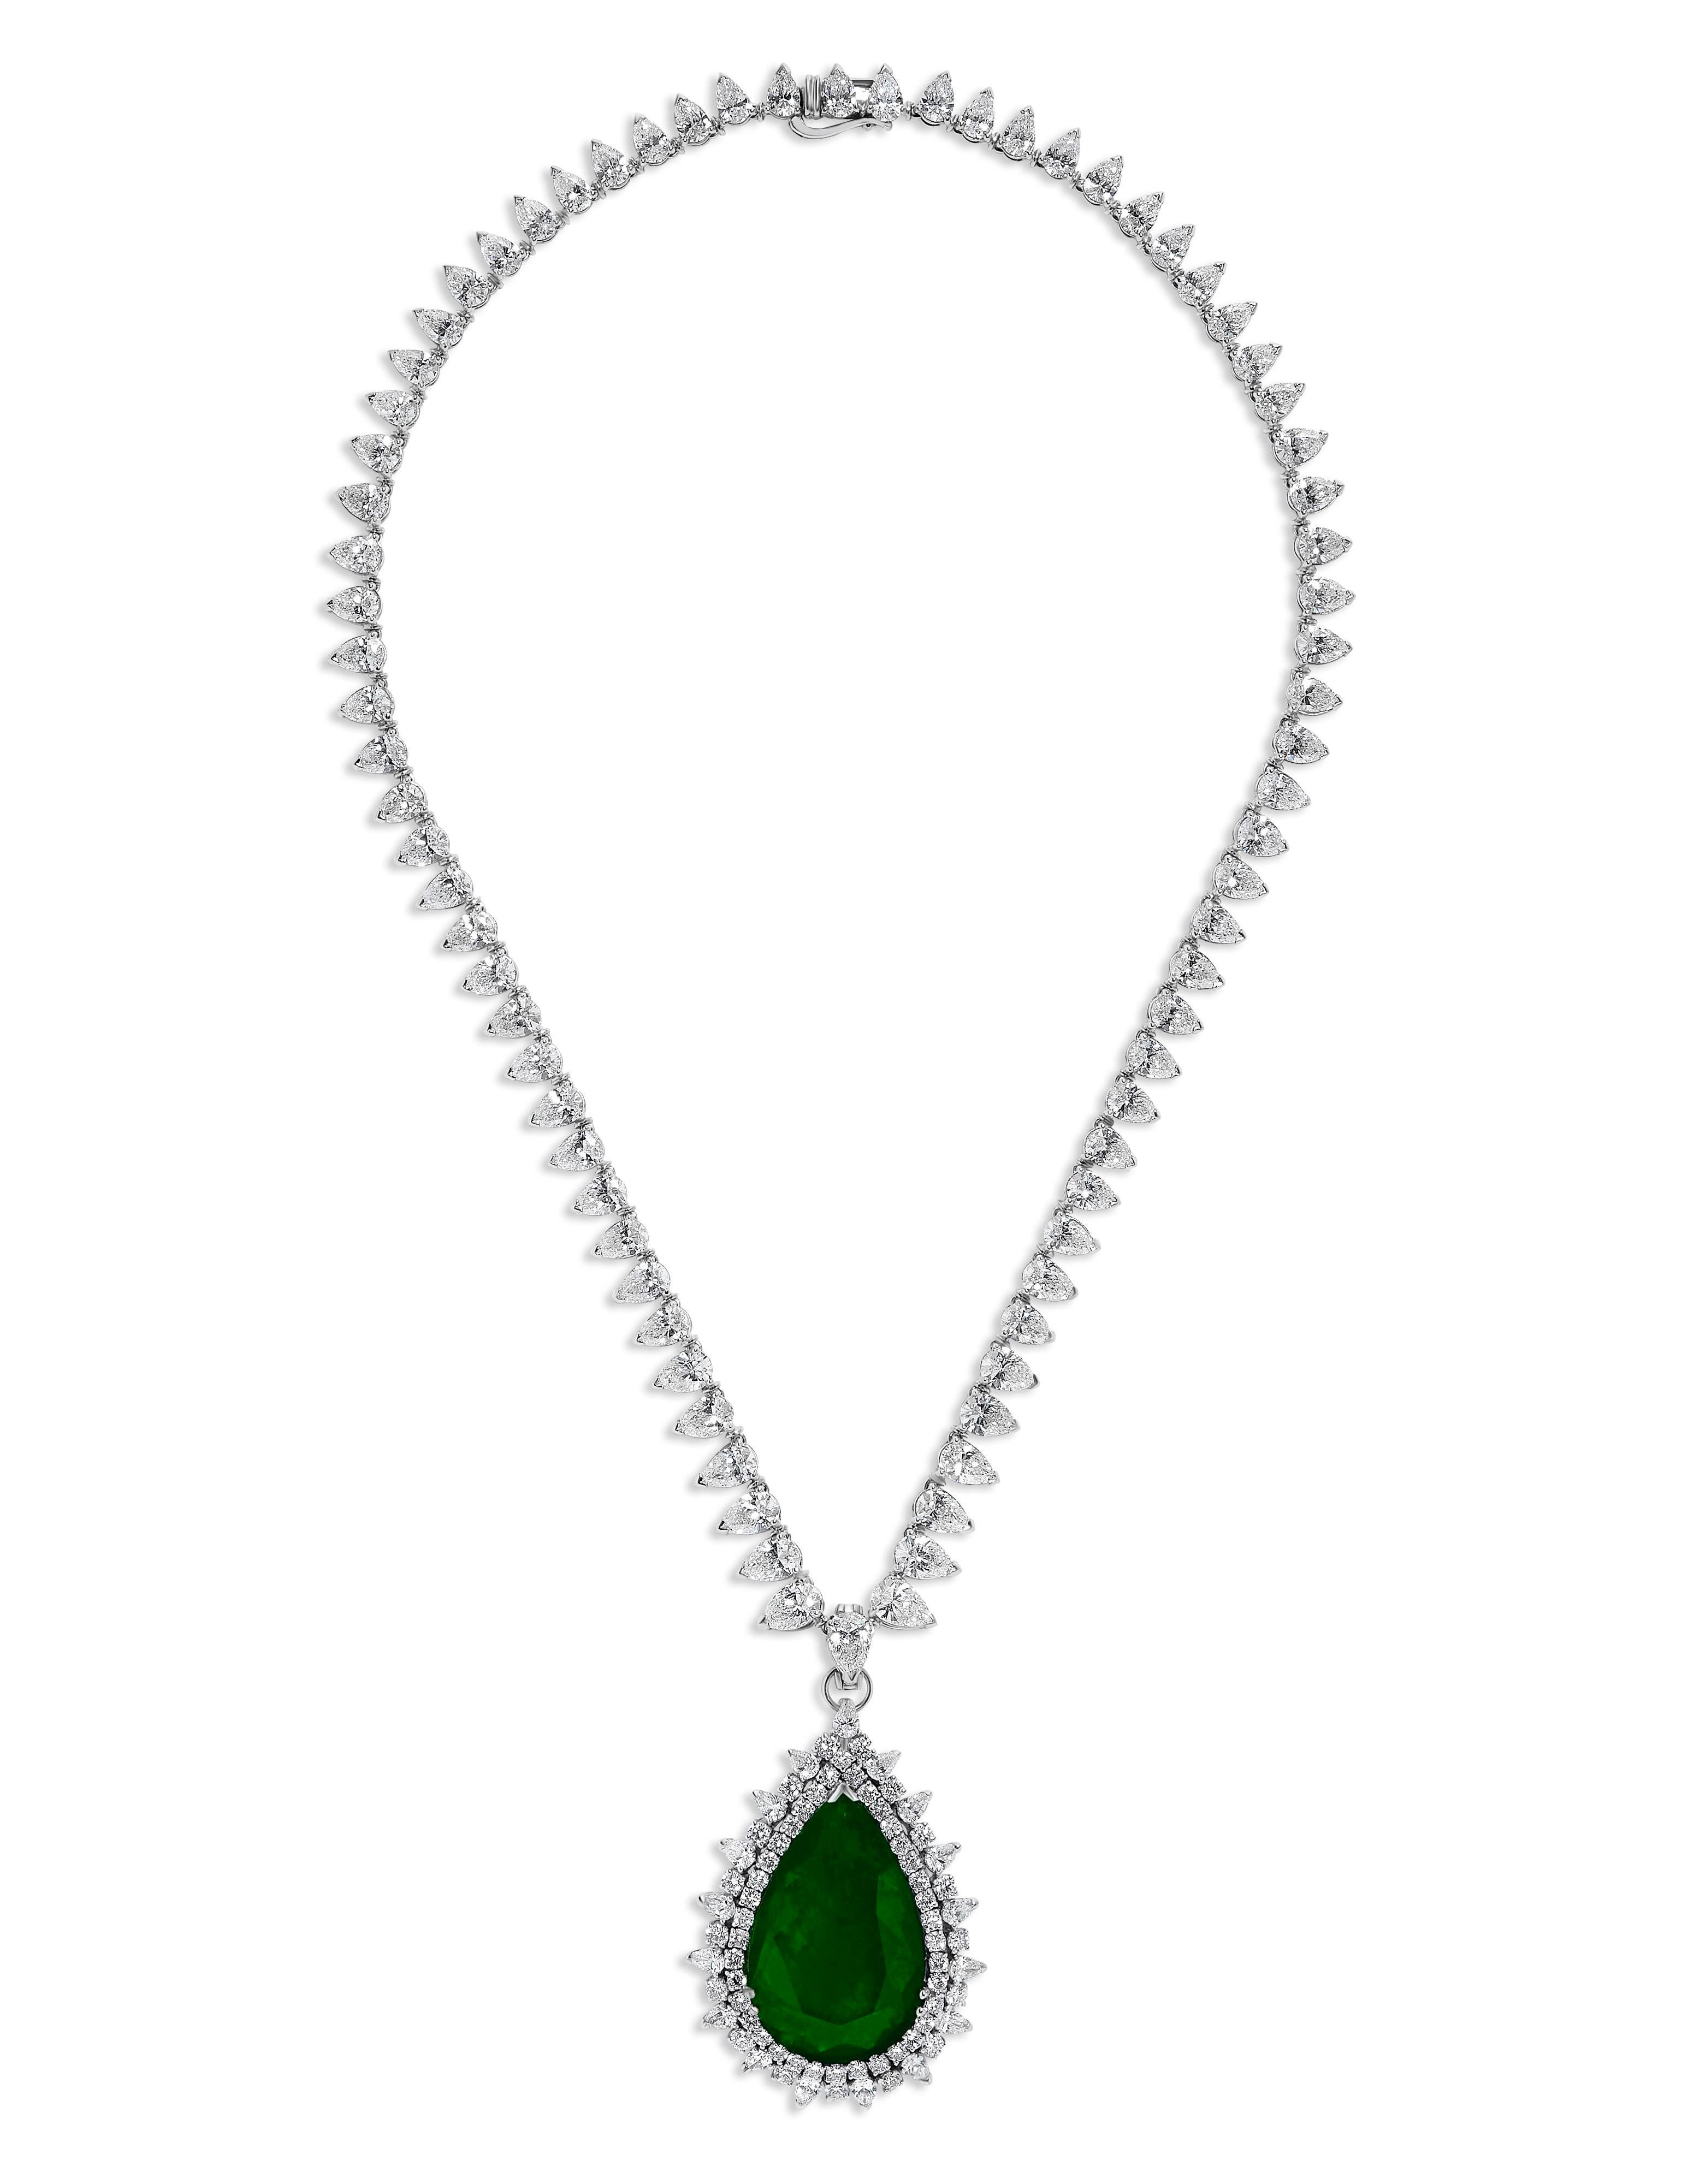 From the Museum Vault At Emilio Jewelry Vault in New York, 
Set in 18k gold featuring a certified Colombian vivid green center 24.53cts vivid green in color. 
Featuring another 38.35 carats of white diamonds E-F color, vvs1-vs2 clarity. 
Please